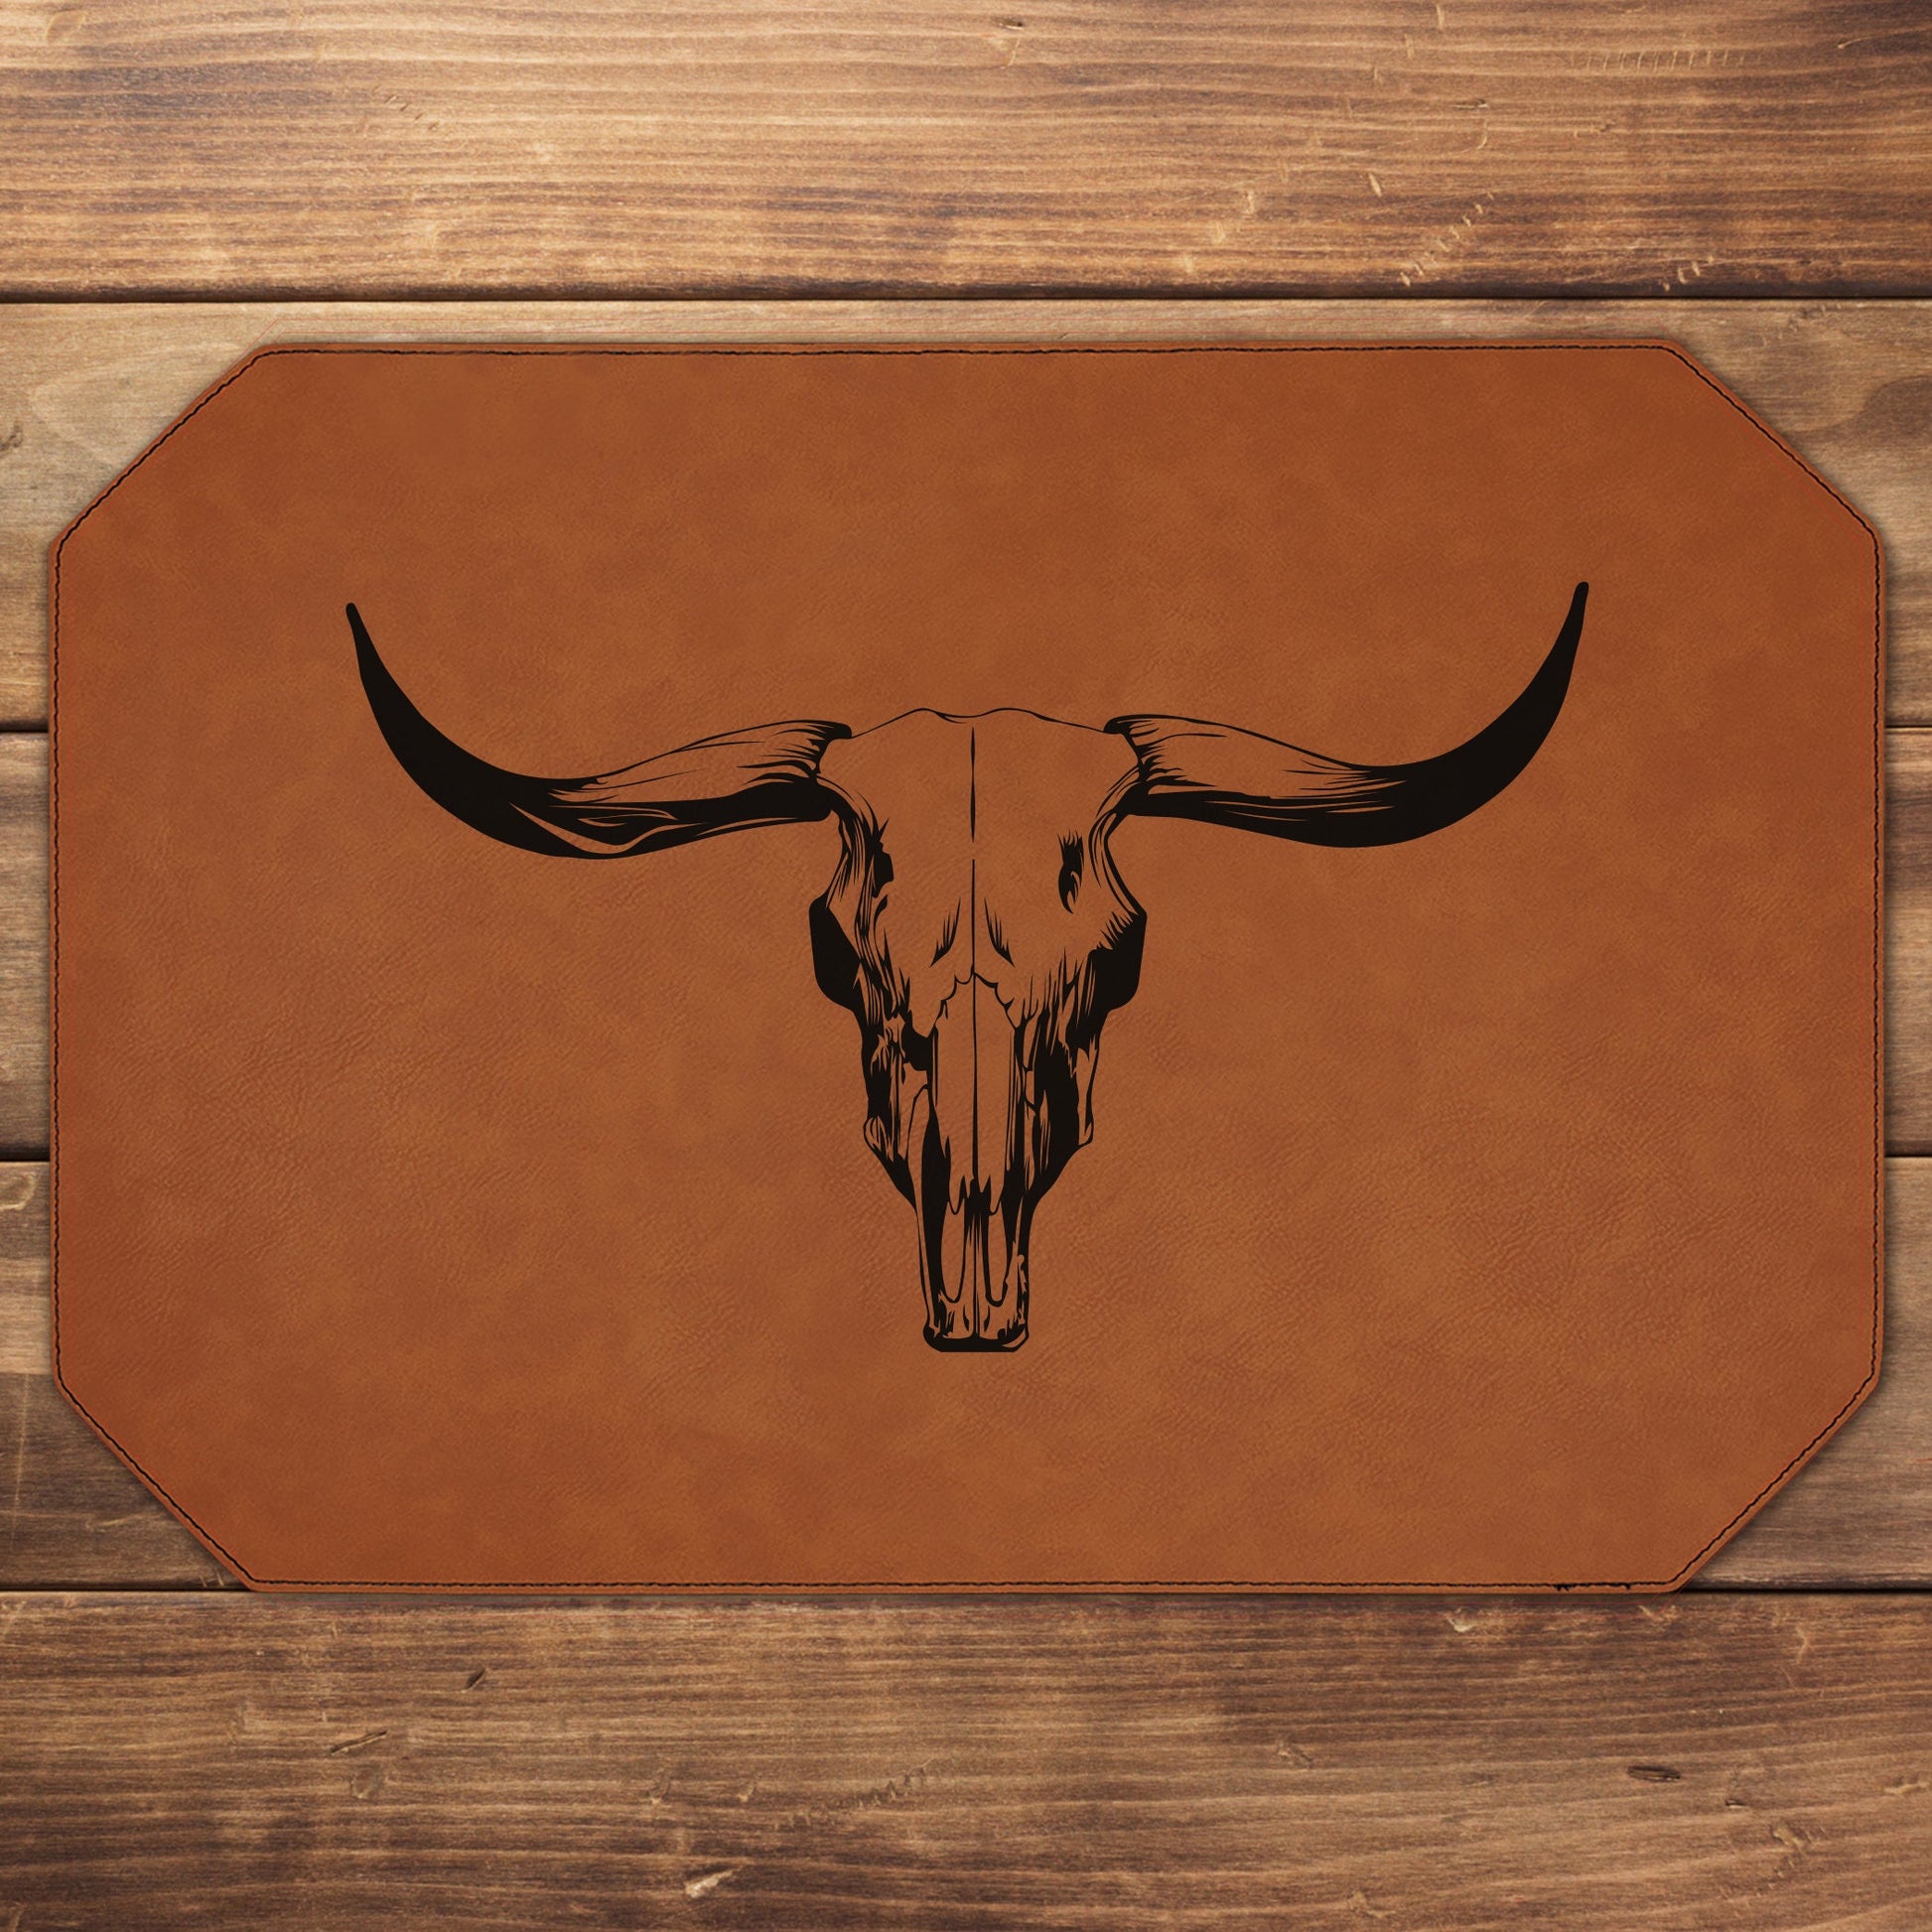 Longhorn Skull Leather Placemat Western Boho Placemats Laser Engraved Leather Dining Room Table Place Holders Rustic Farmhouse Table Decor